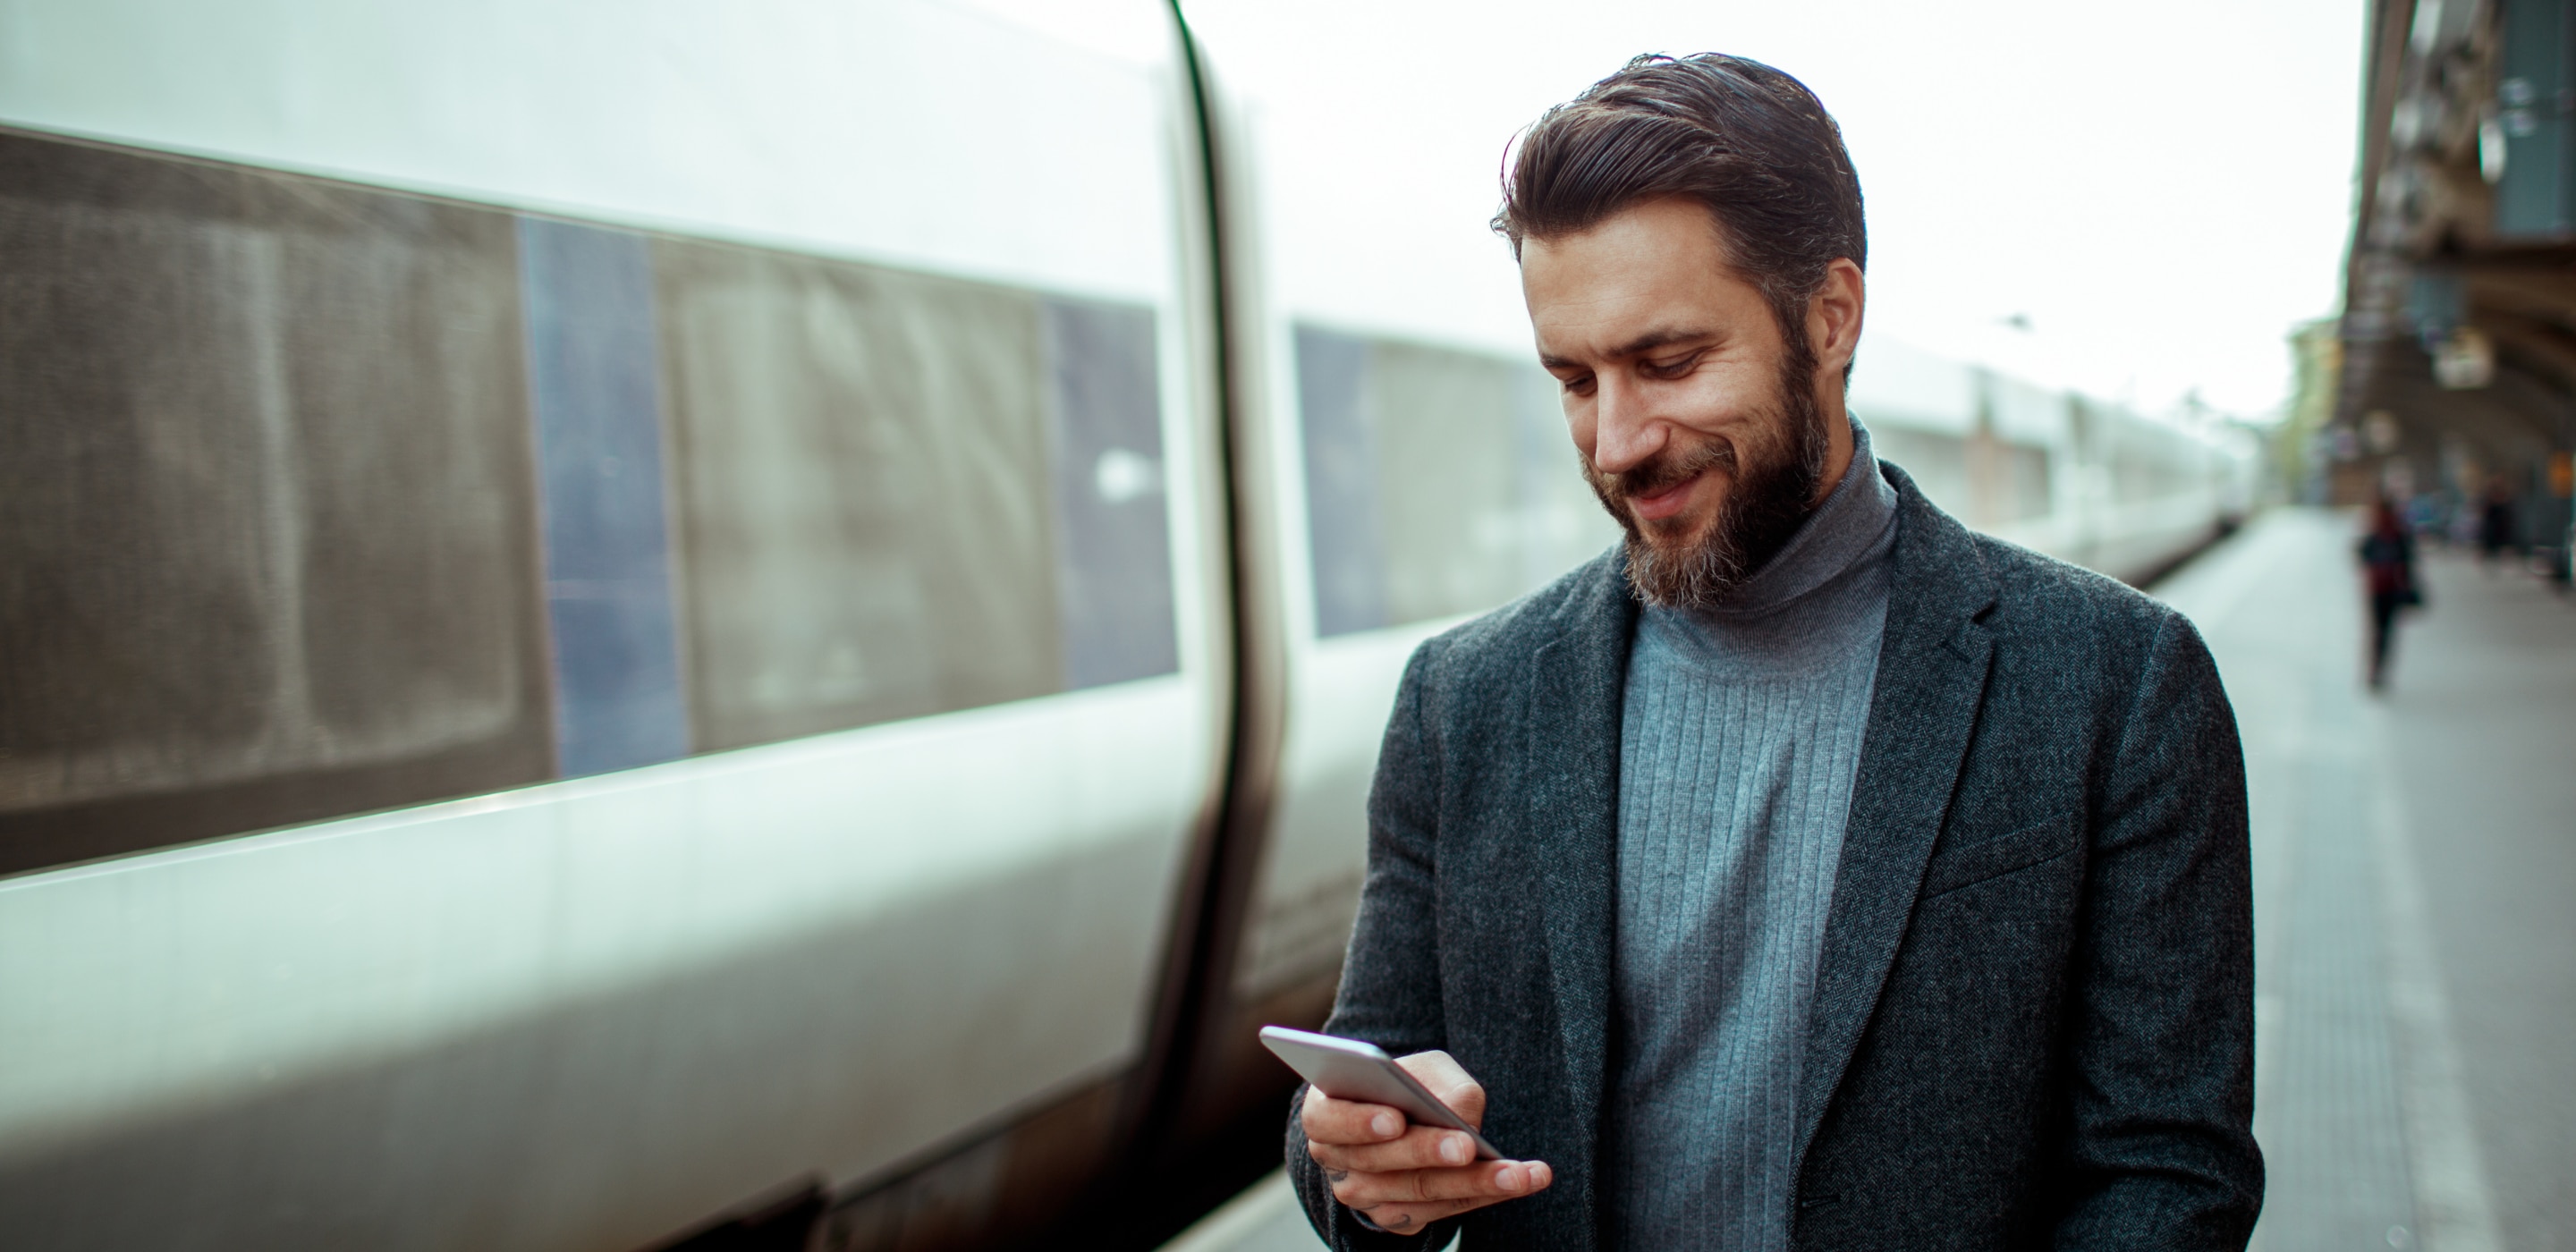 A man looking at a cellphone standing next to a train